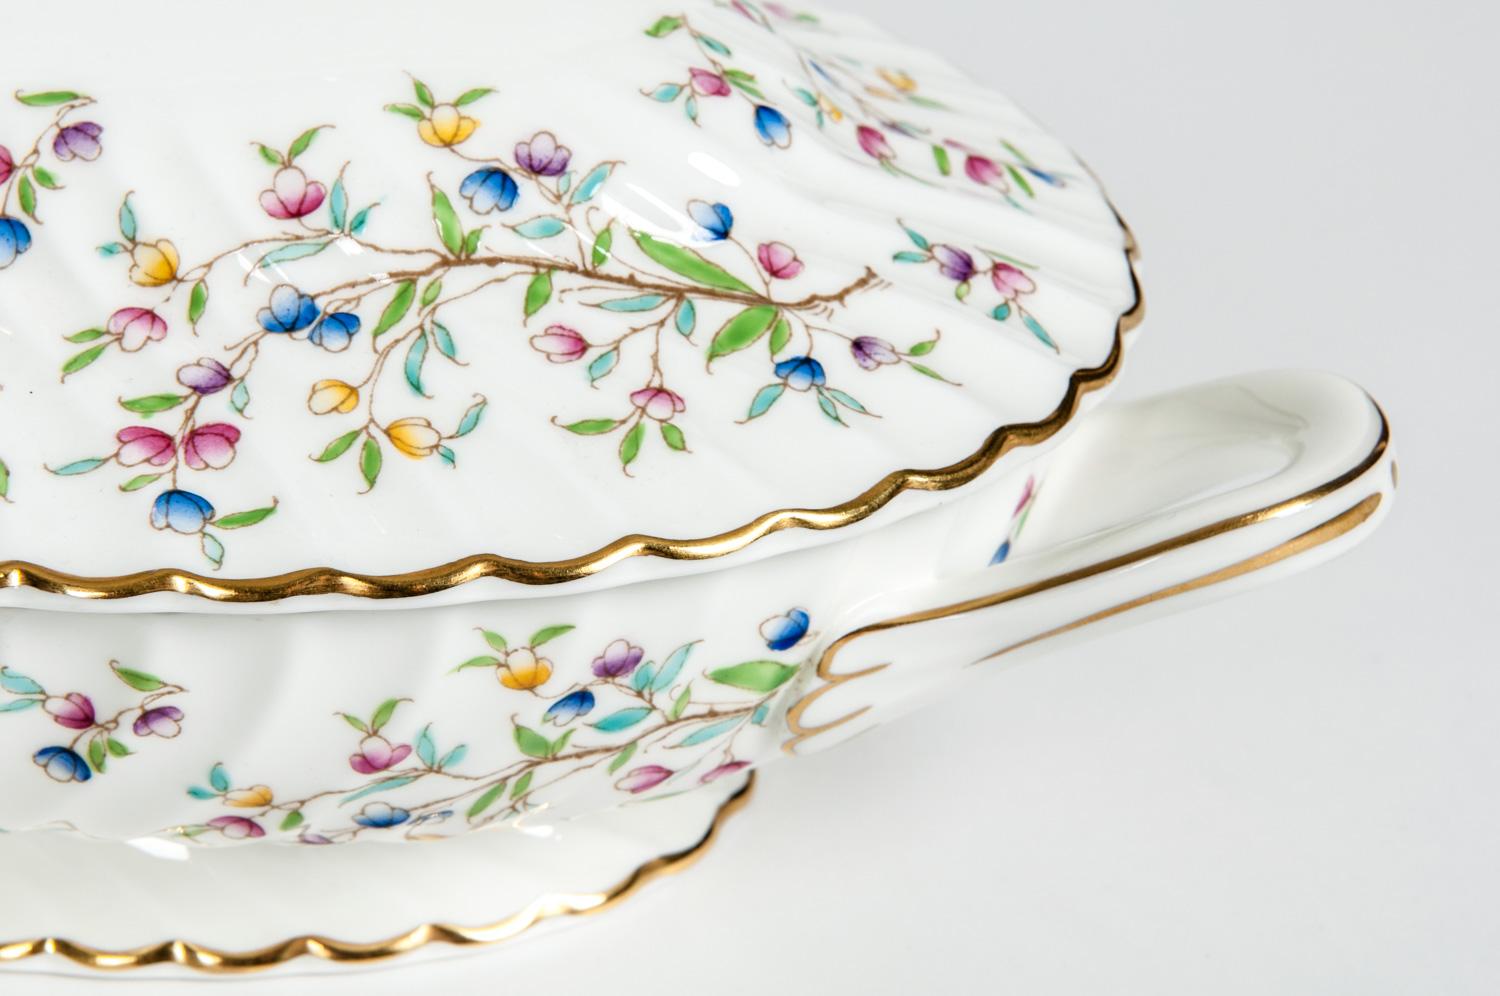 Minton English Full Service Dinnerware for 12 People 4